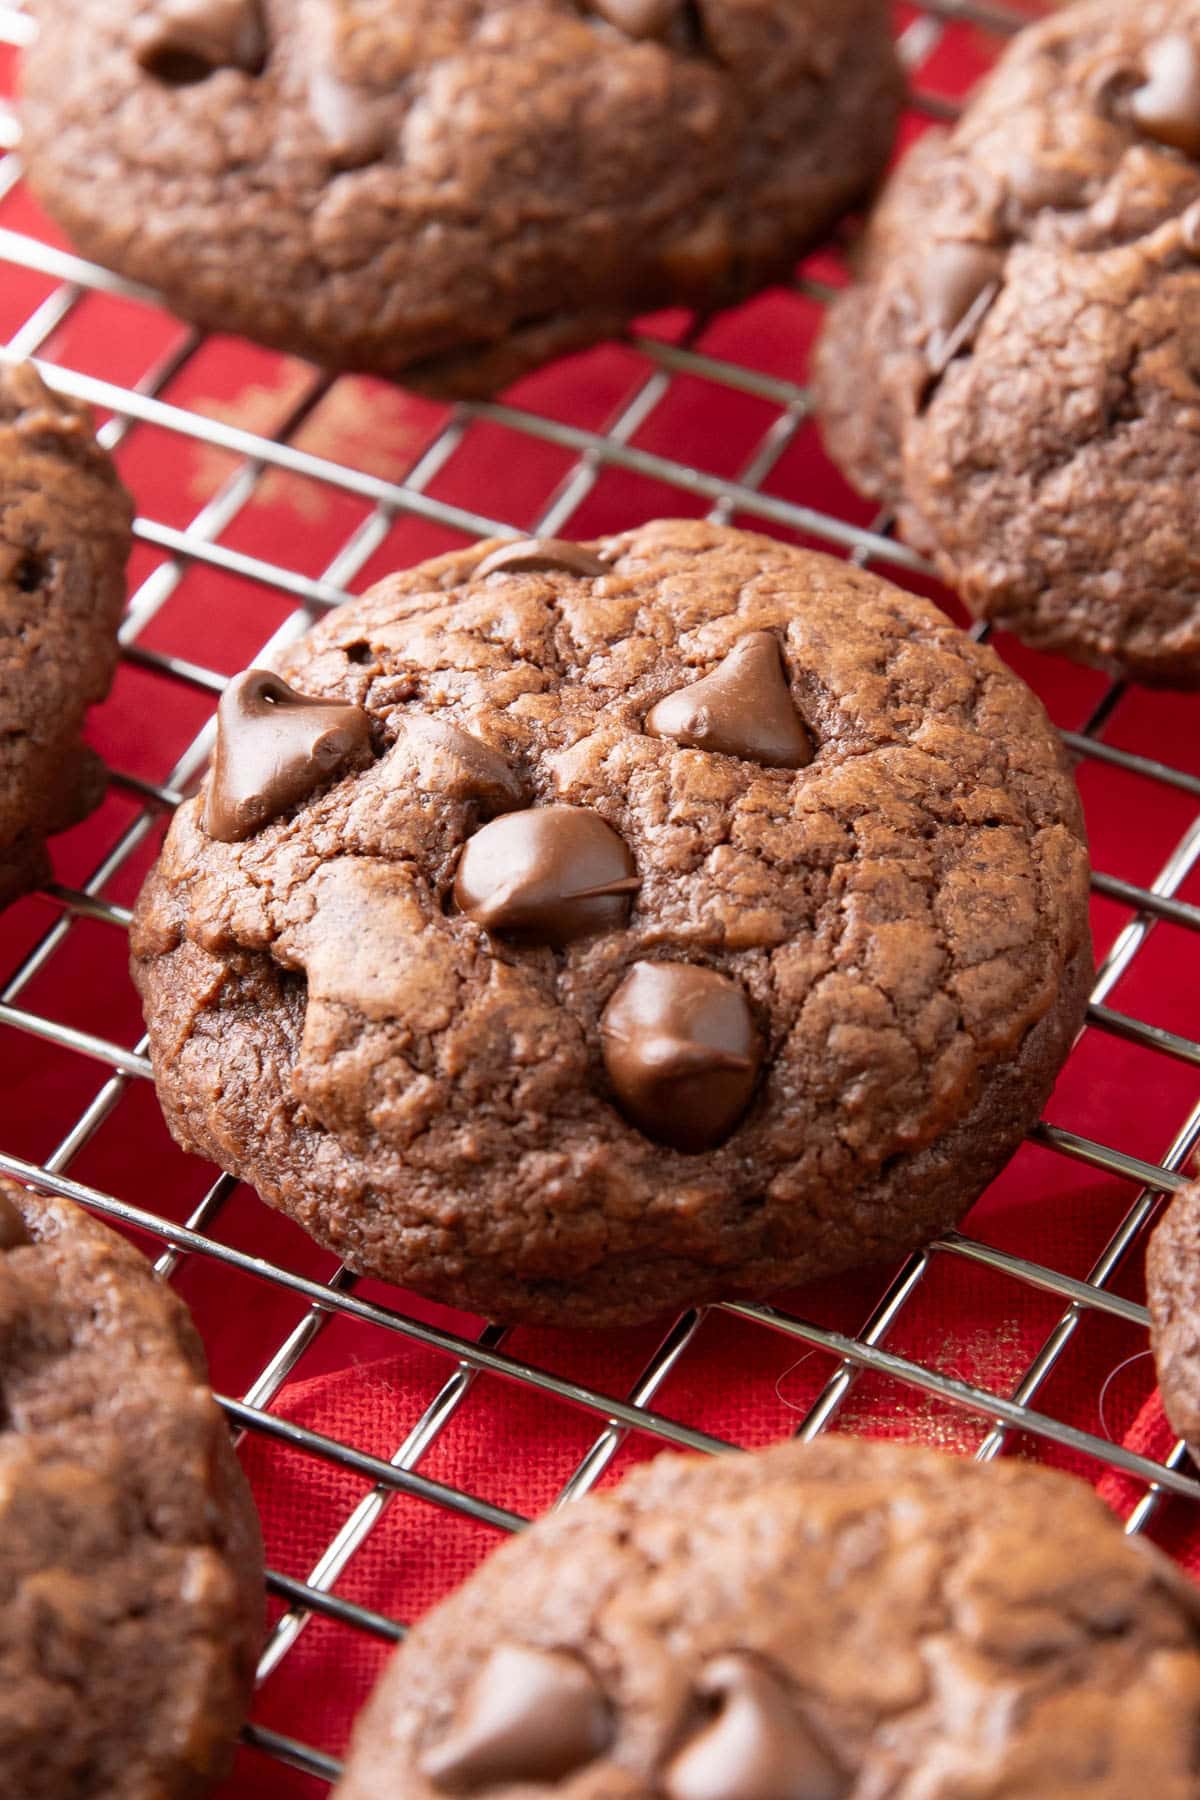 Super close up of cookies to showcase crispy edges and shiny tops, fudgy centers, and lots of chocolate chips on top